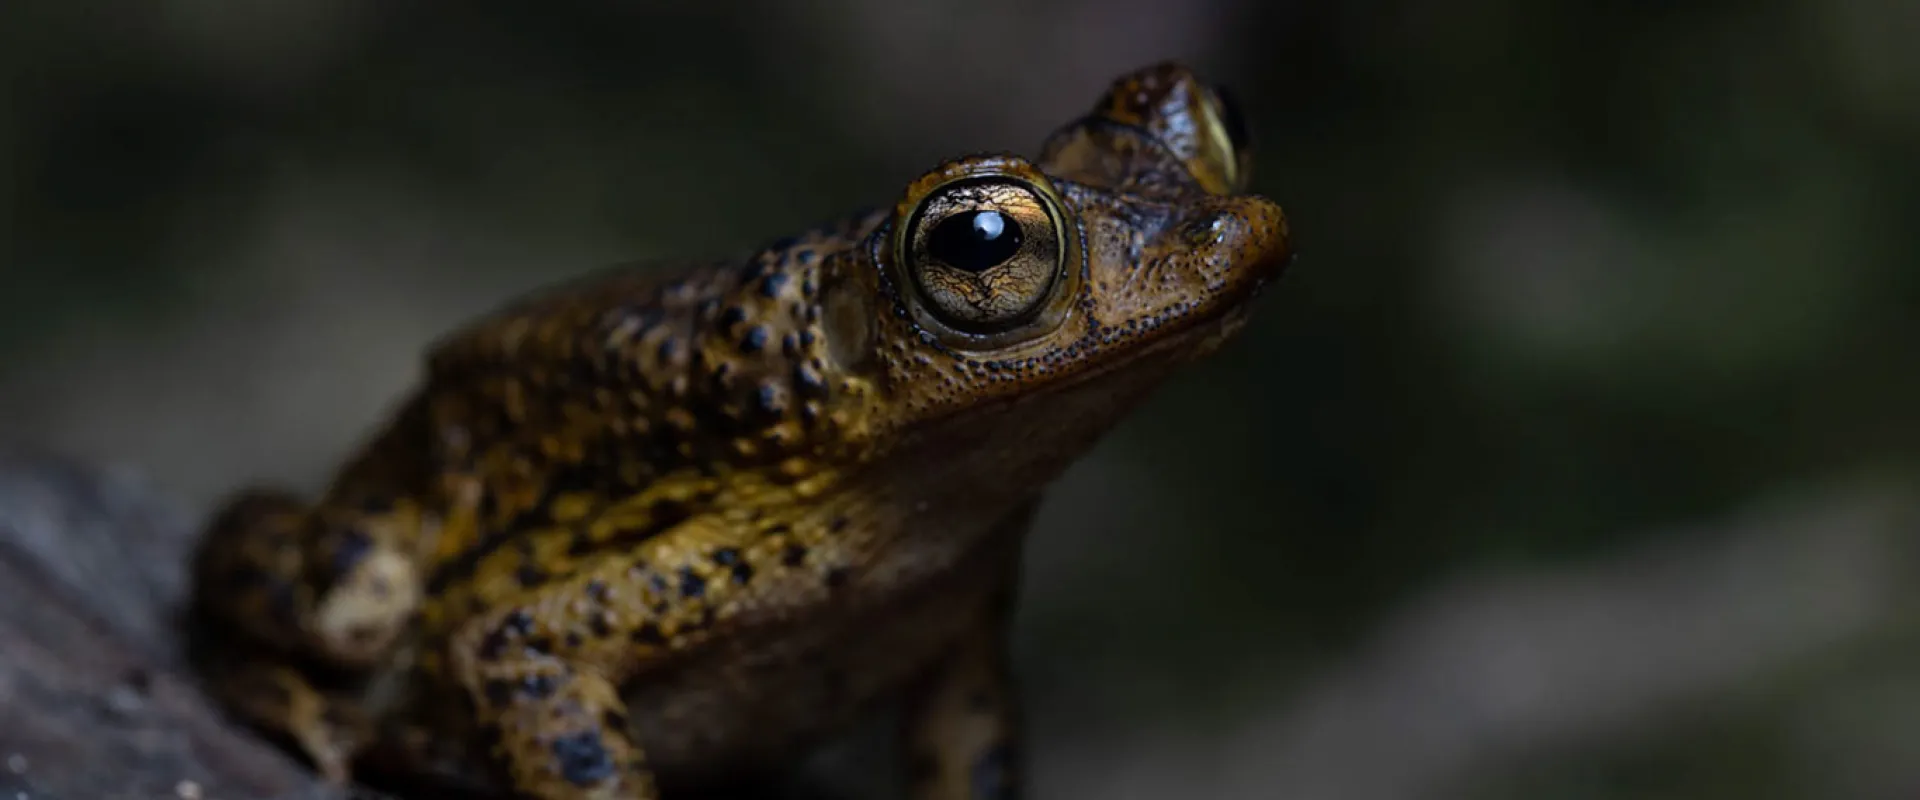 Conservation Is Not Closed: World Frog Day During COVID-19